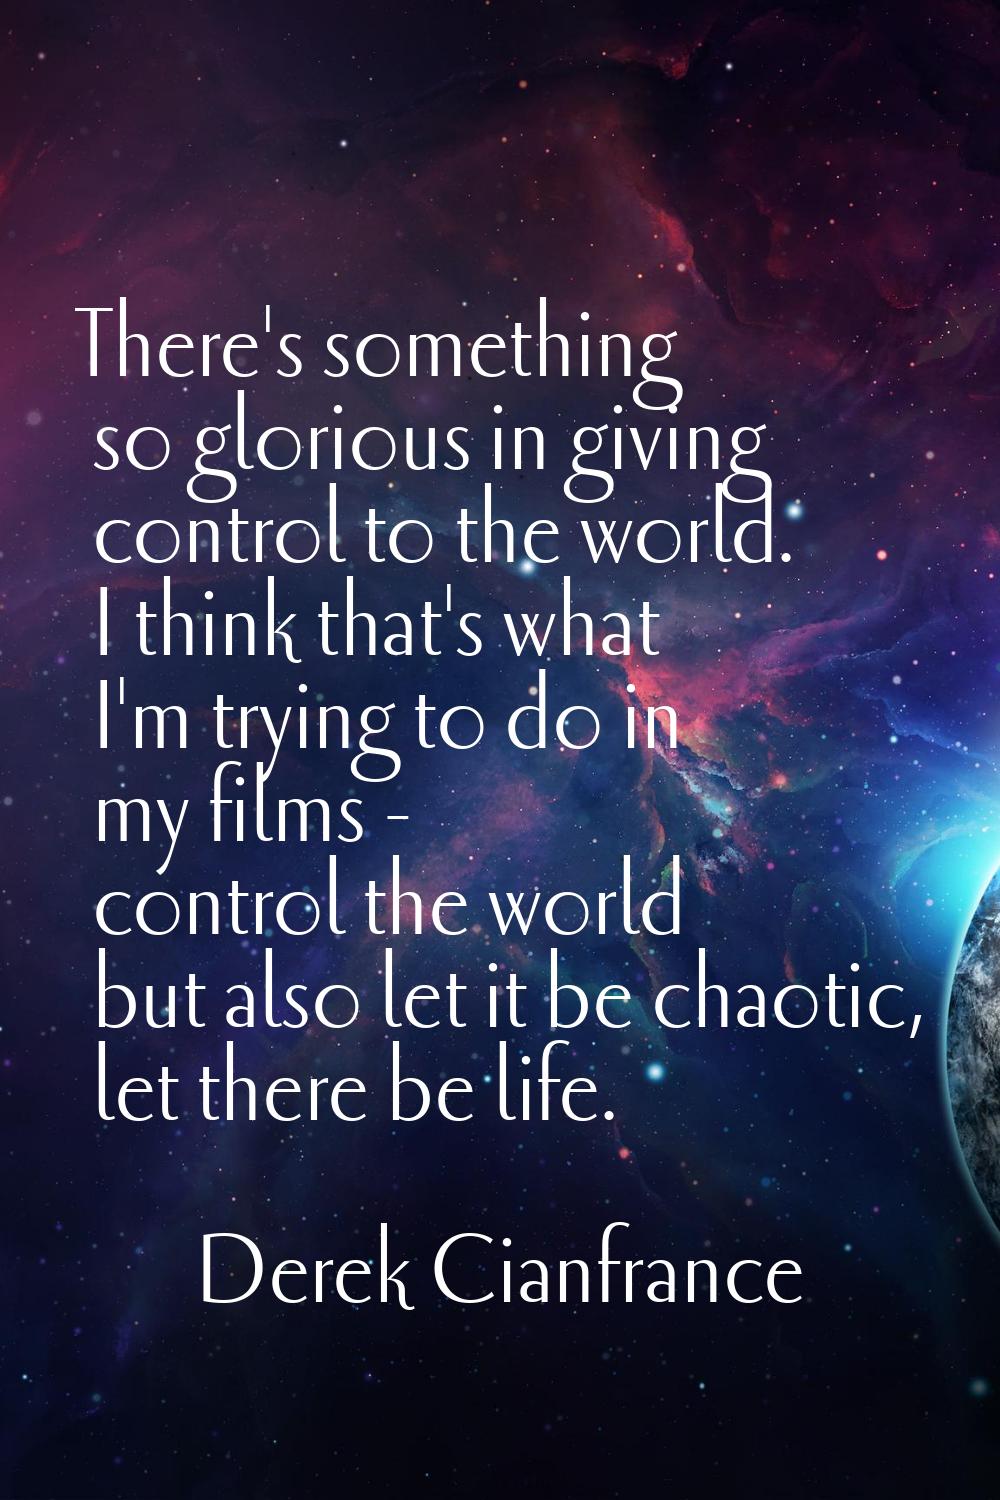 There's something so glorious in giving control to the world. I think that's what I'm trying to do 